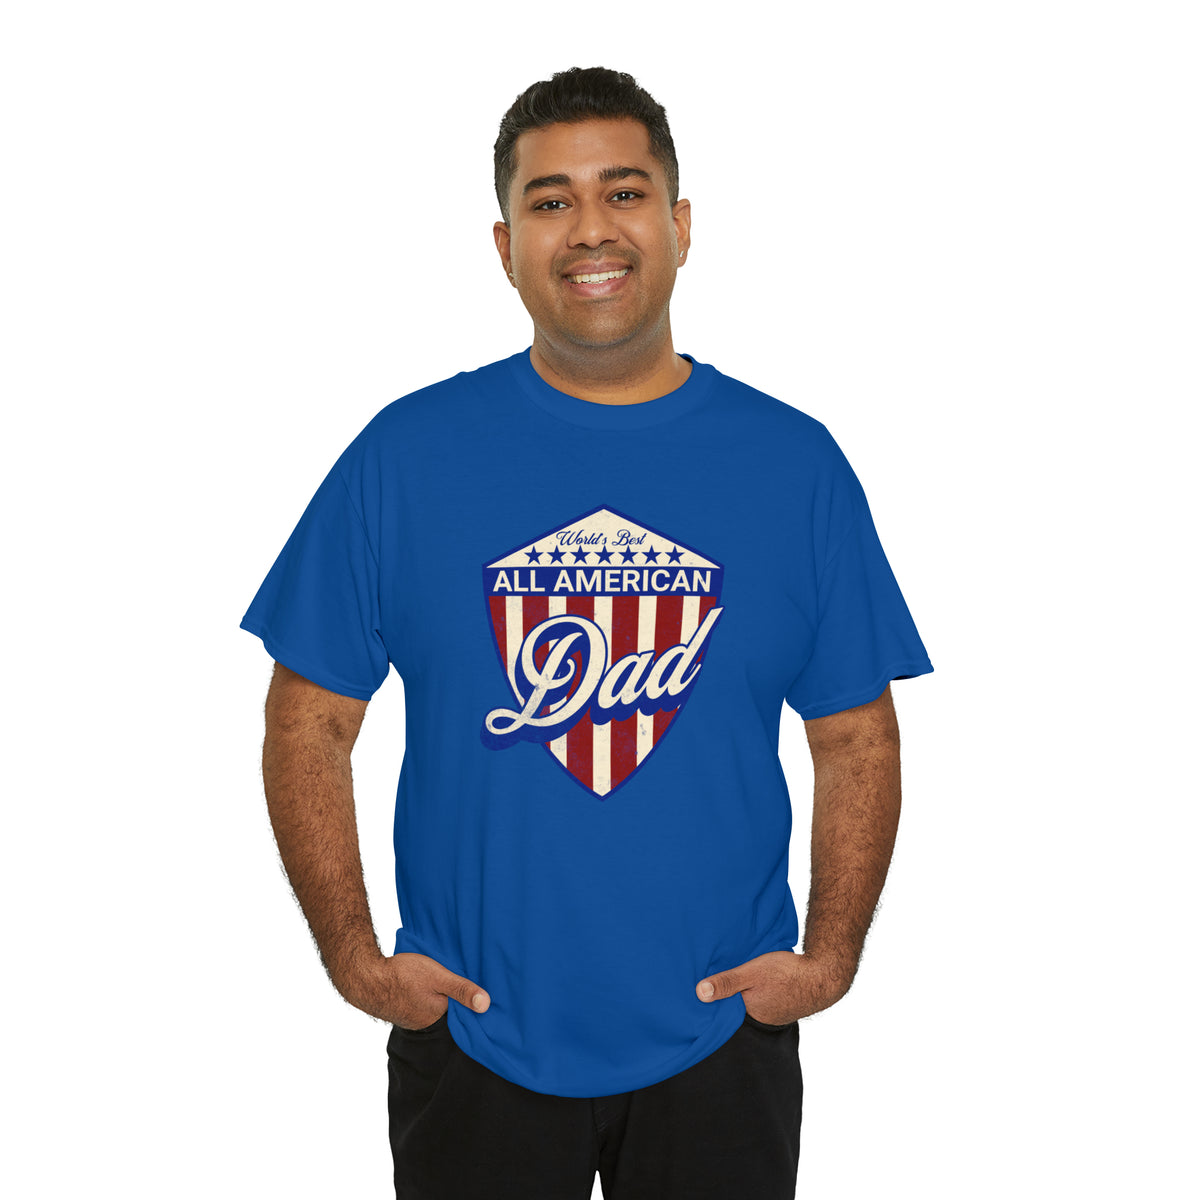 All American Dad T-Shirt